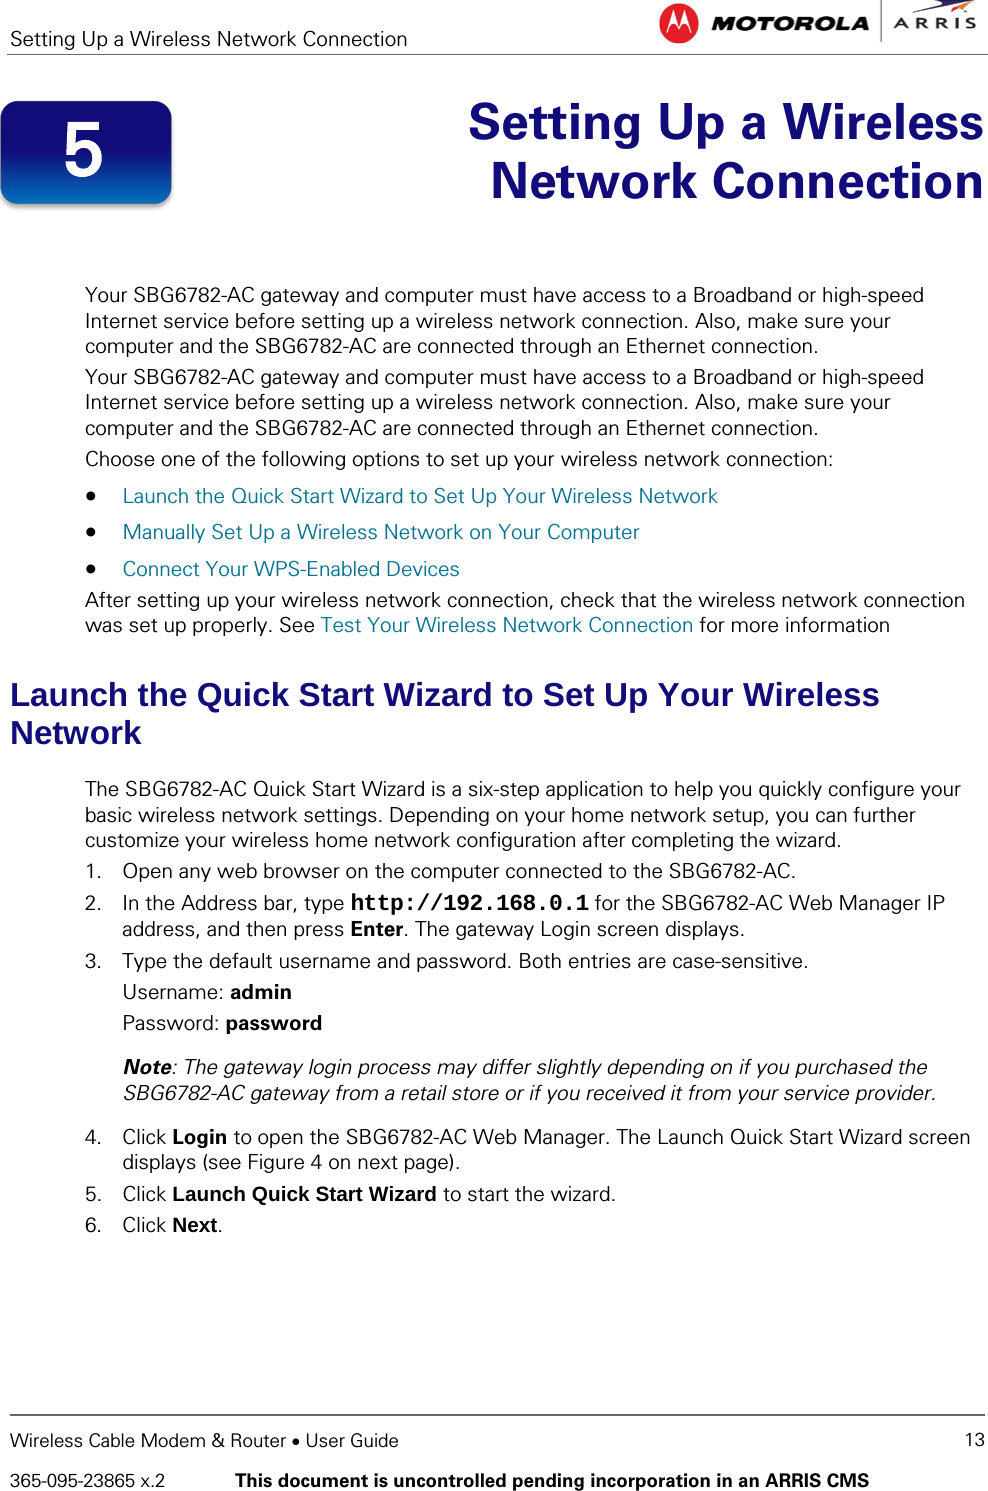 Setting Up a Wireless Network Connection   Wireless Cable Modem &amp; Router • User Guide 13 365-095-23865 x.2   This document is uncontrolled pending incorporation in an ARRIS CMS   Setting Up a Wireless Network Connection   Your SBG6782-AC gateway and computer must have access to a Broadband or high-speed Internet service before setting up a wireless network connection. Also, make sure your computer and the SBG6782-AC are connected through an Ethernet connection.  Your SBG6782-AC gateway and computer must have access to a Broadband or high-speed Internet service before setting up a wireless network connection. Also, make sure your computer and the SBG6782-AC are connected through an Ethernet connection.  Choose one of the following options to set up your wireless network connection: • Launch the Quick Start Wizard to Set Up Your Wireless Network • Manually Set Up a Wireless Network on Your Computer • Connect Your WPS-Enabled Devices After setting up your wireless network connection, check that the wireless network connection was set up properly. See Test Your Wireless Network Connection for more information Launch the Quick Start Wizard to Set Up Your Wireless Network The SBG6782-AC Quick Start Wizard is a six-step application to help you quickly configure your basic wireless network settings. Depending on your home network setup, you can further customize your wireless home network configuration after completing the wizard. 1. Open any web browser on the computer connected to the SBG6782-AC. 2. In the Address bar, type http://192.168.0.1 for the SBG6782-AC Web Manager IP address, and then press Enter. The gateway Login screen displays. 3. Type the default username and password. Both entries are case-sensitive. Username: admin Password: password Note: The gateway login process may differ slightly depending on if you purchased the SBG6782-AC gateway from a retail store or if you received it from your service provider.  4. Click Login to open the SBG6782-AC Web Manager. The Launch Quick Start Wizard screen displays (see Figure 4 on next page). 5. Click Launch Quick Start Wizard to start the wizard. 6. Click Next. 5 